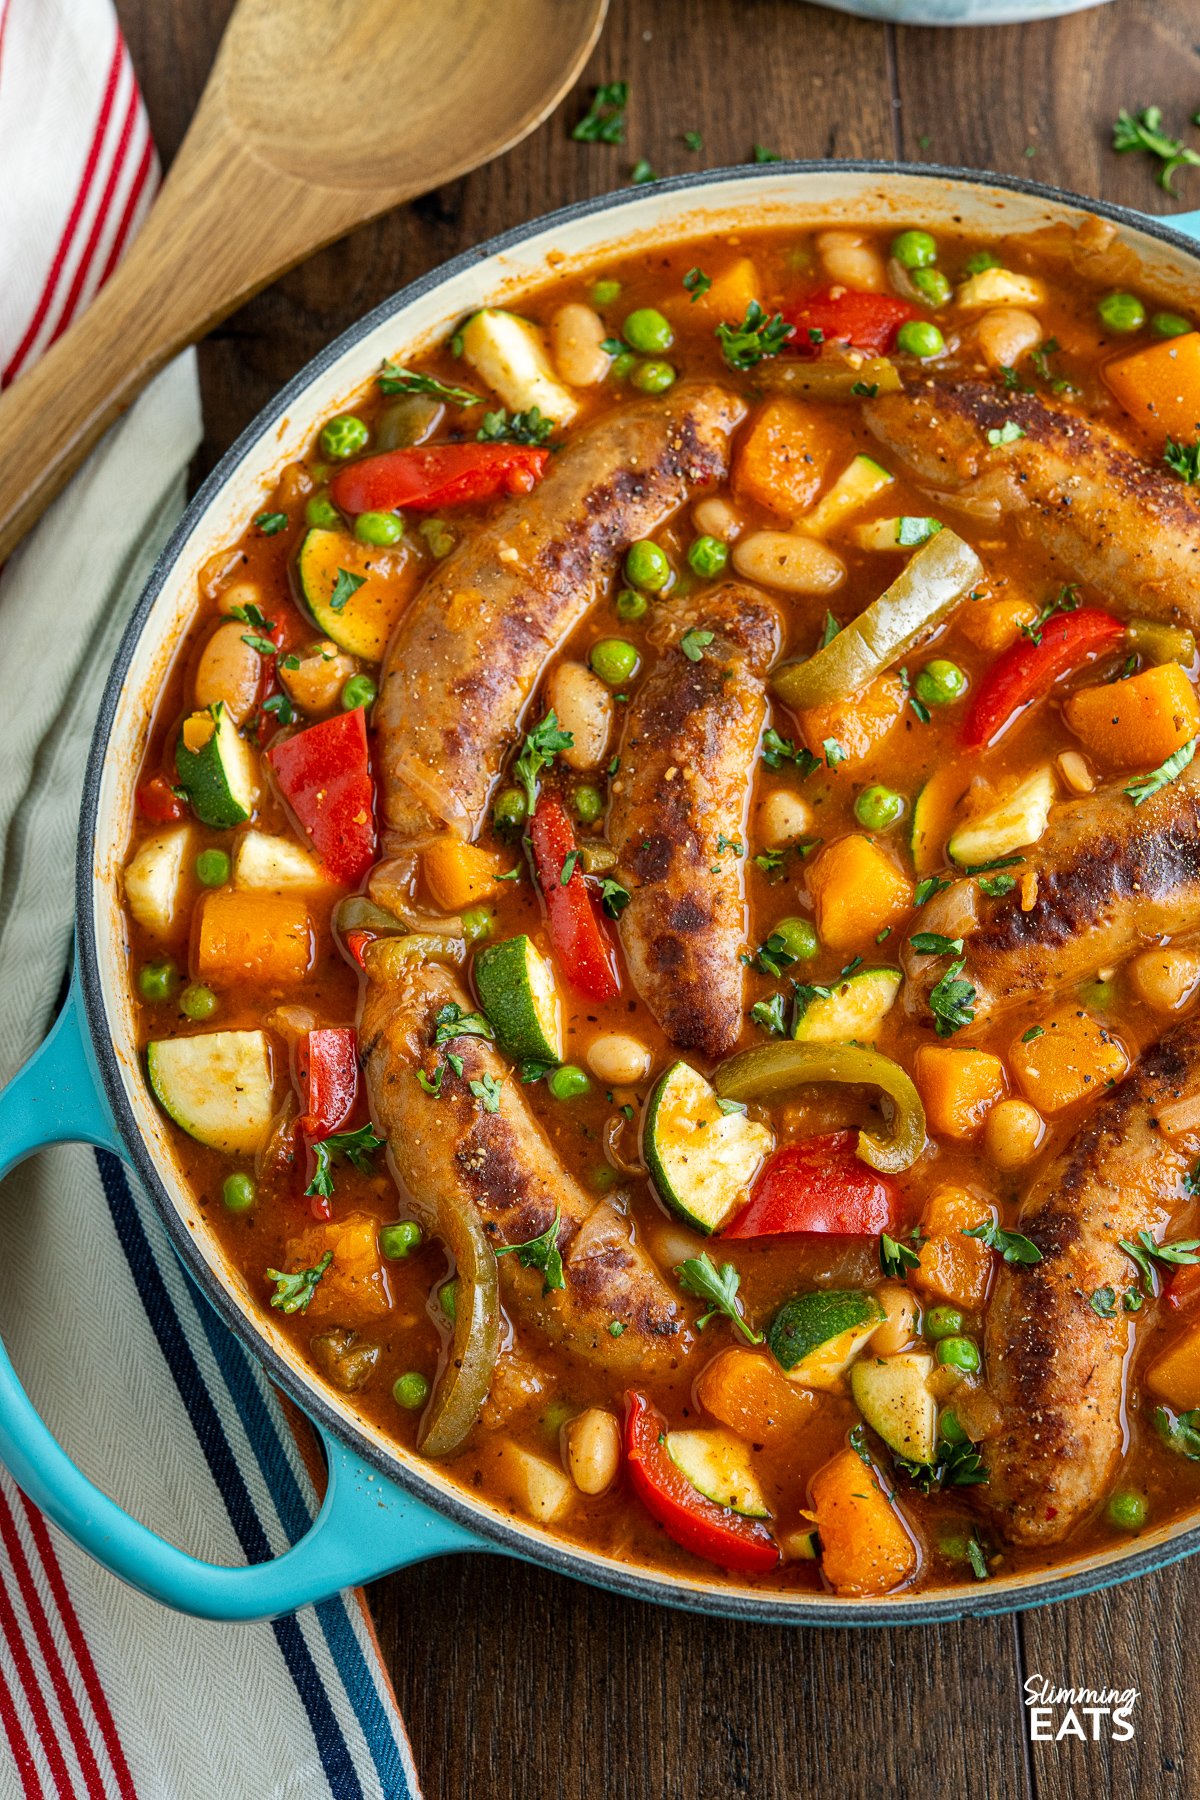 Sausage casserole with a variety of vegetables, presented in a turquoise cast iron pan, accompanied by a wooden spoon resting on the side